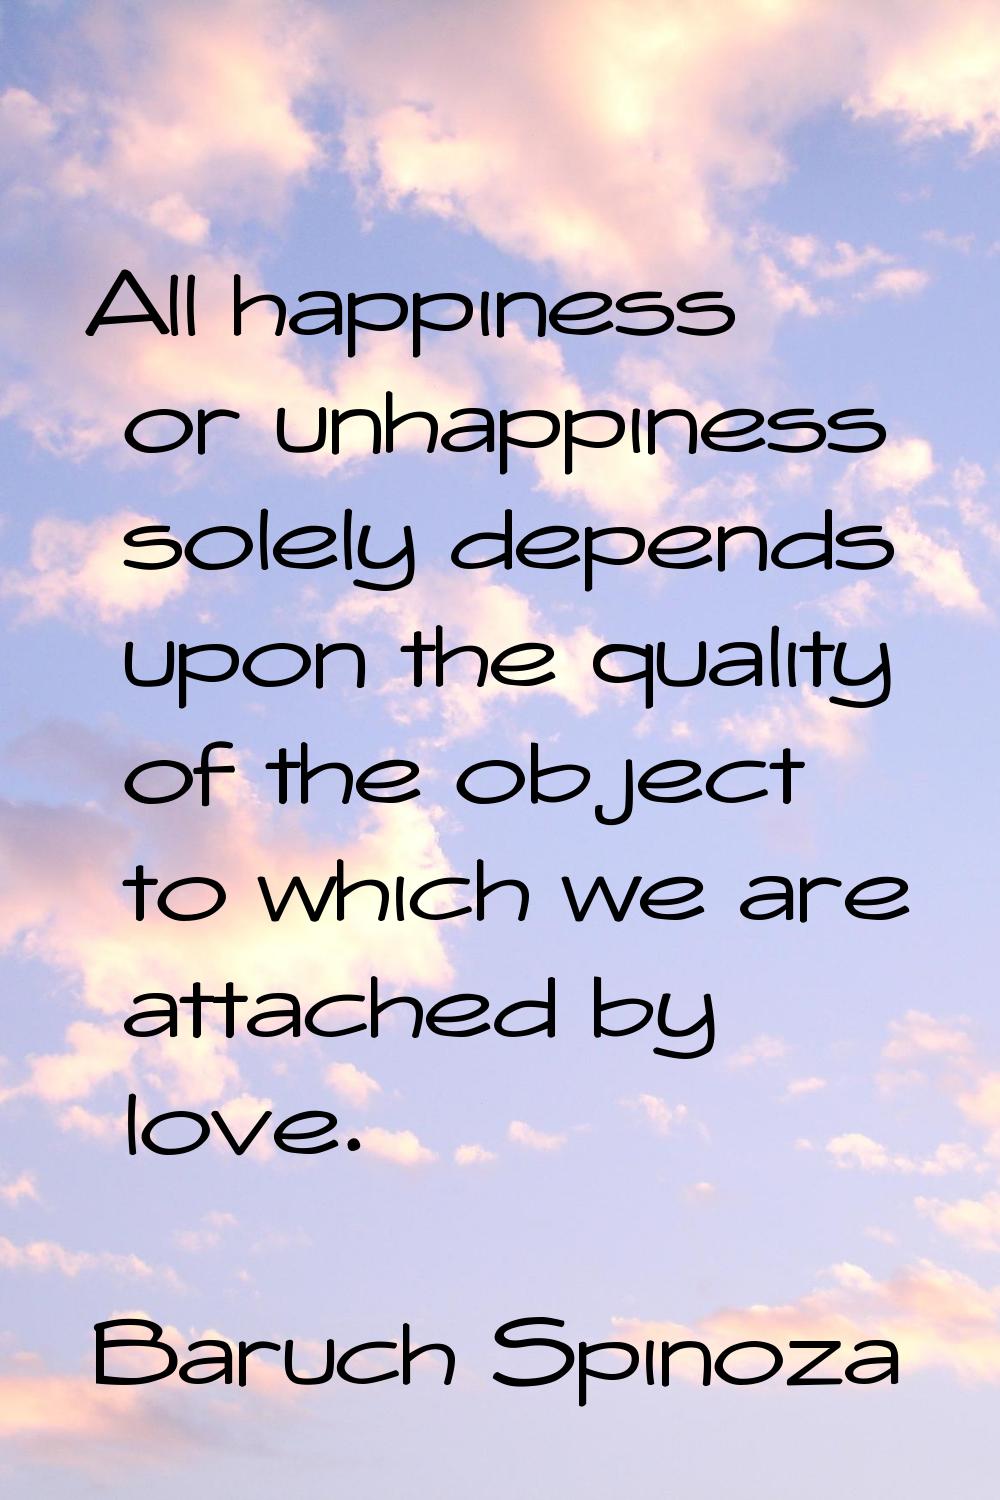 All happiness or unhappiness solely depends upon the quality of the object to which we are attached